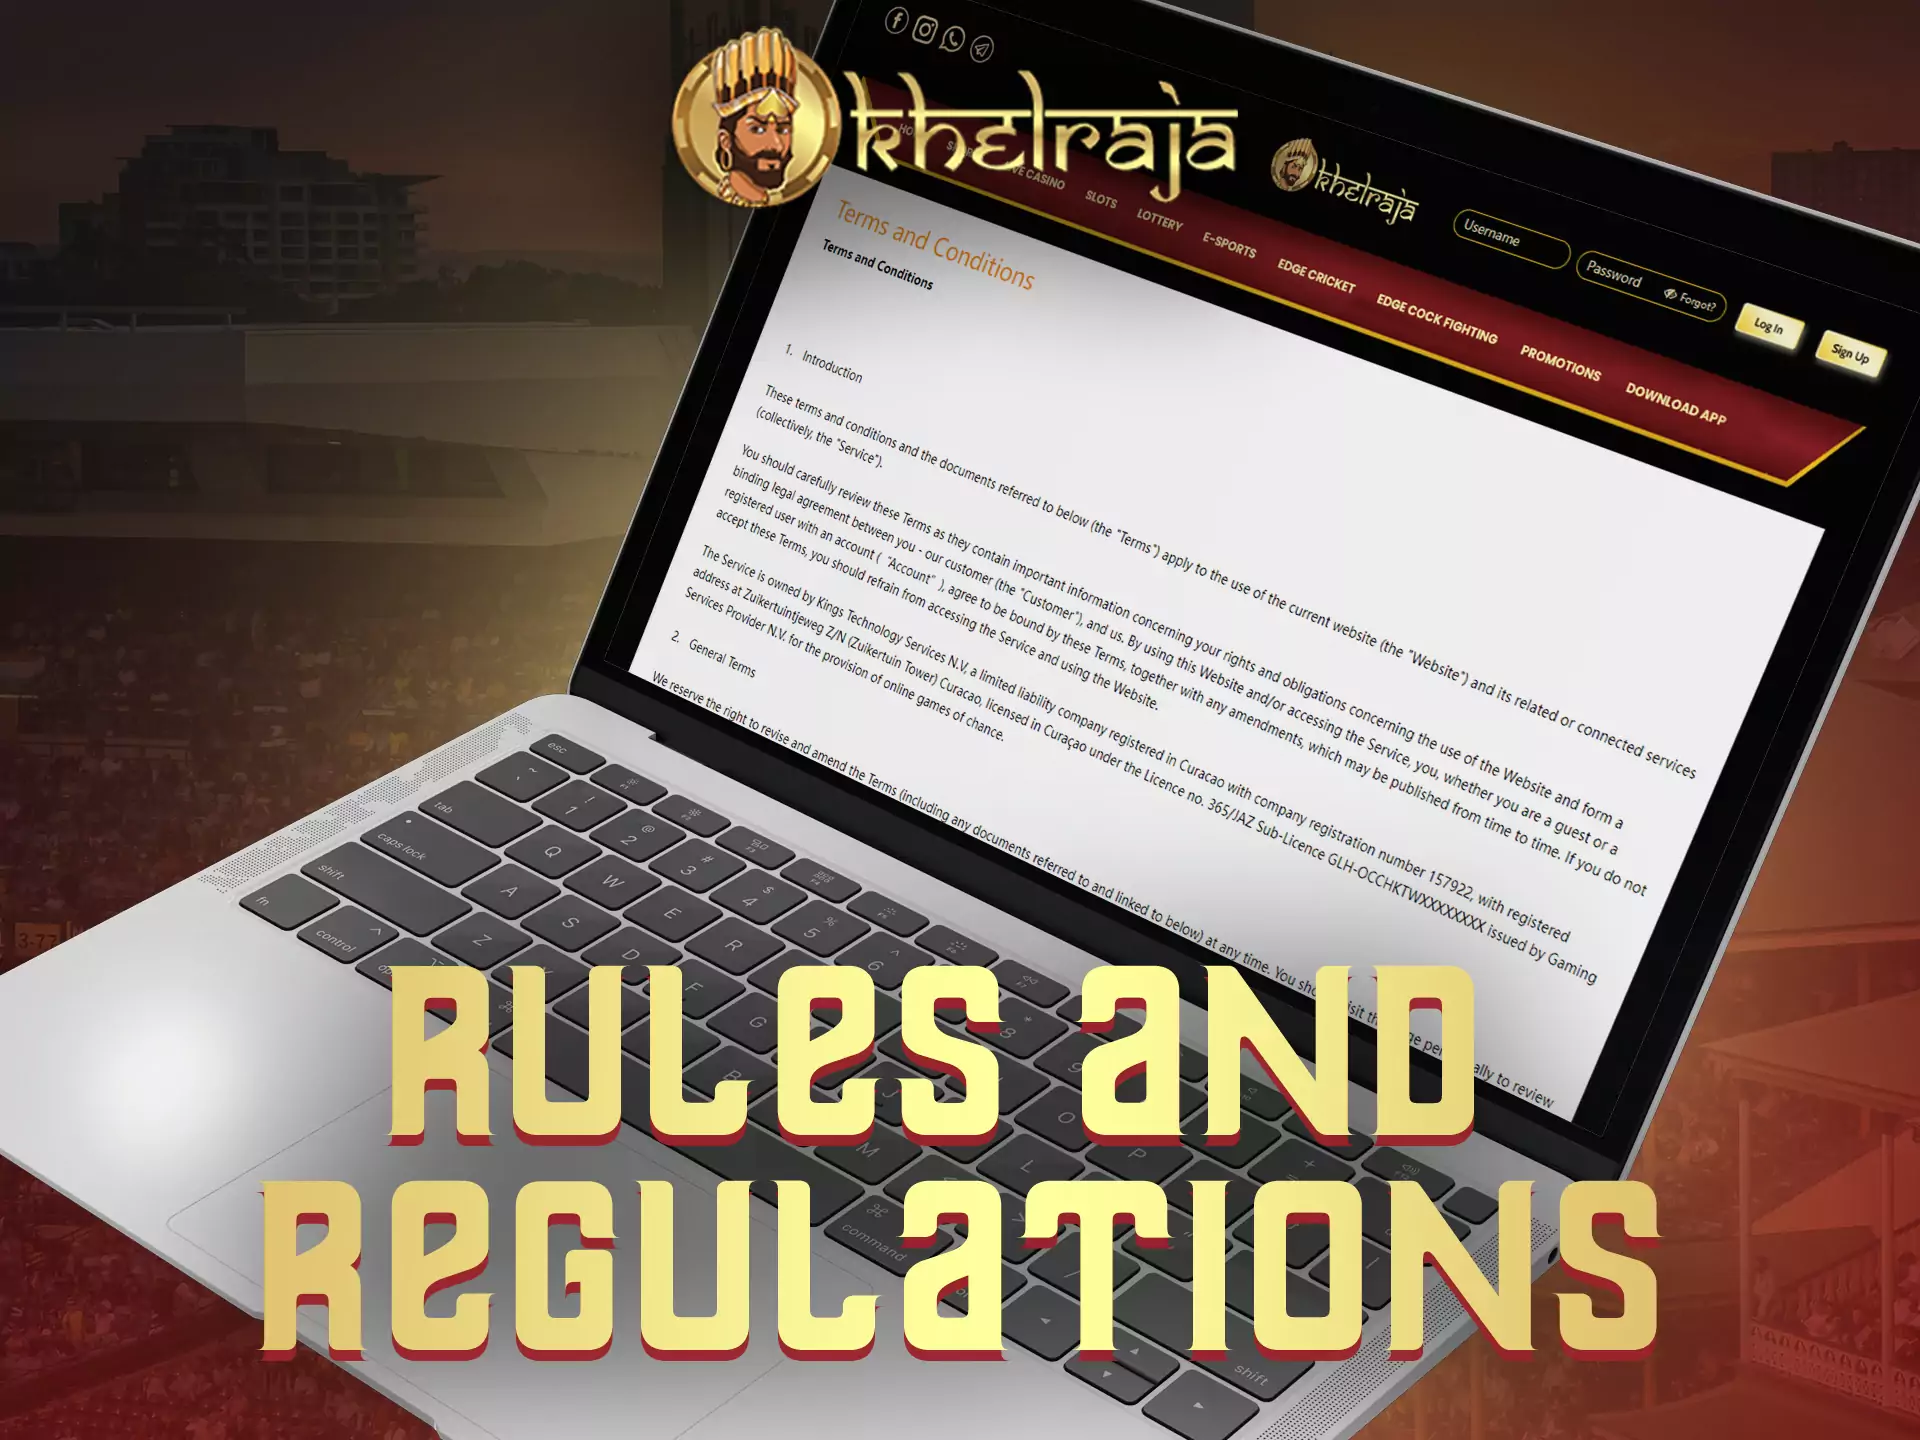 Read the rules of the Khelraja website and follow them.